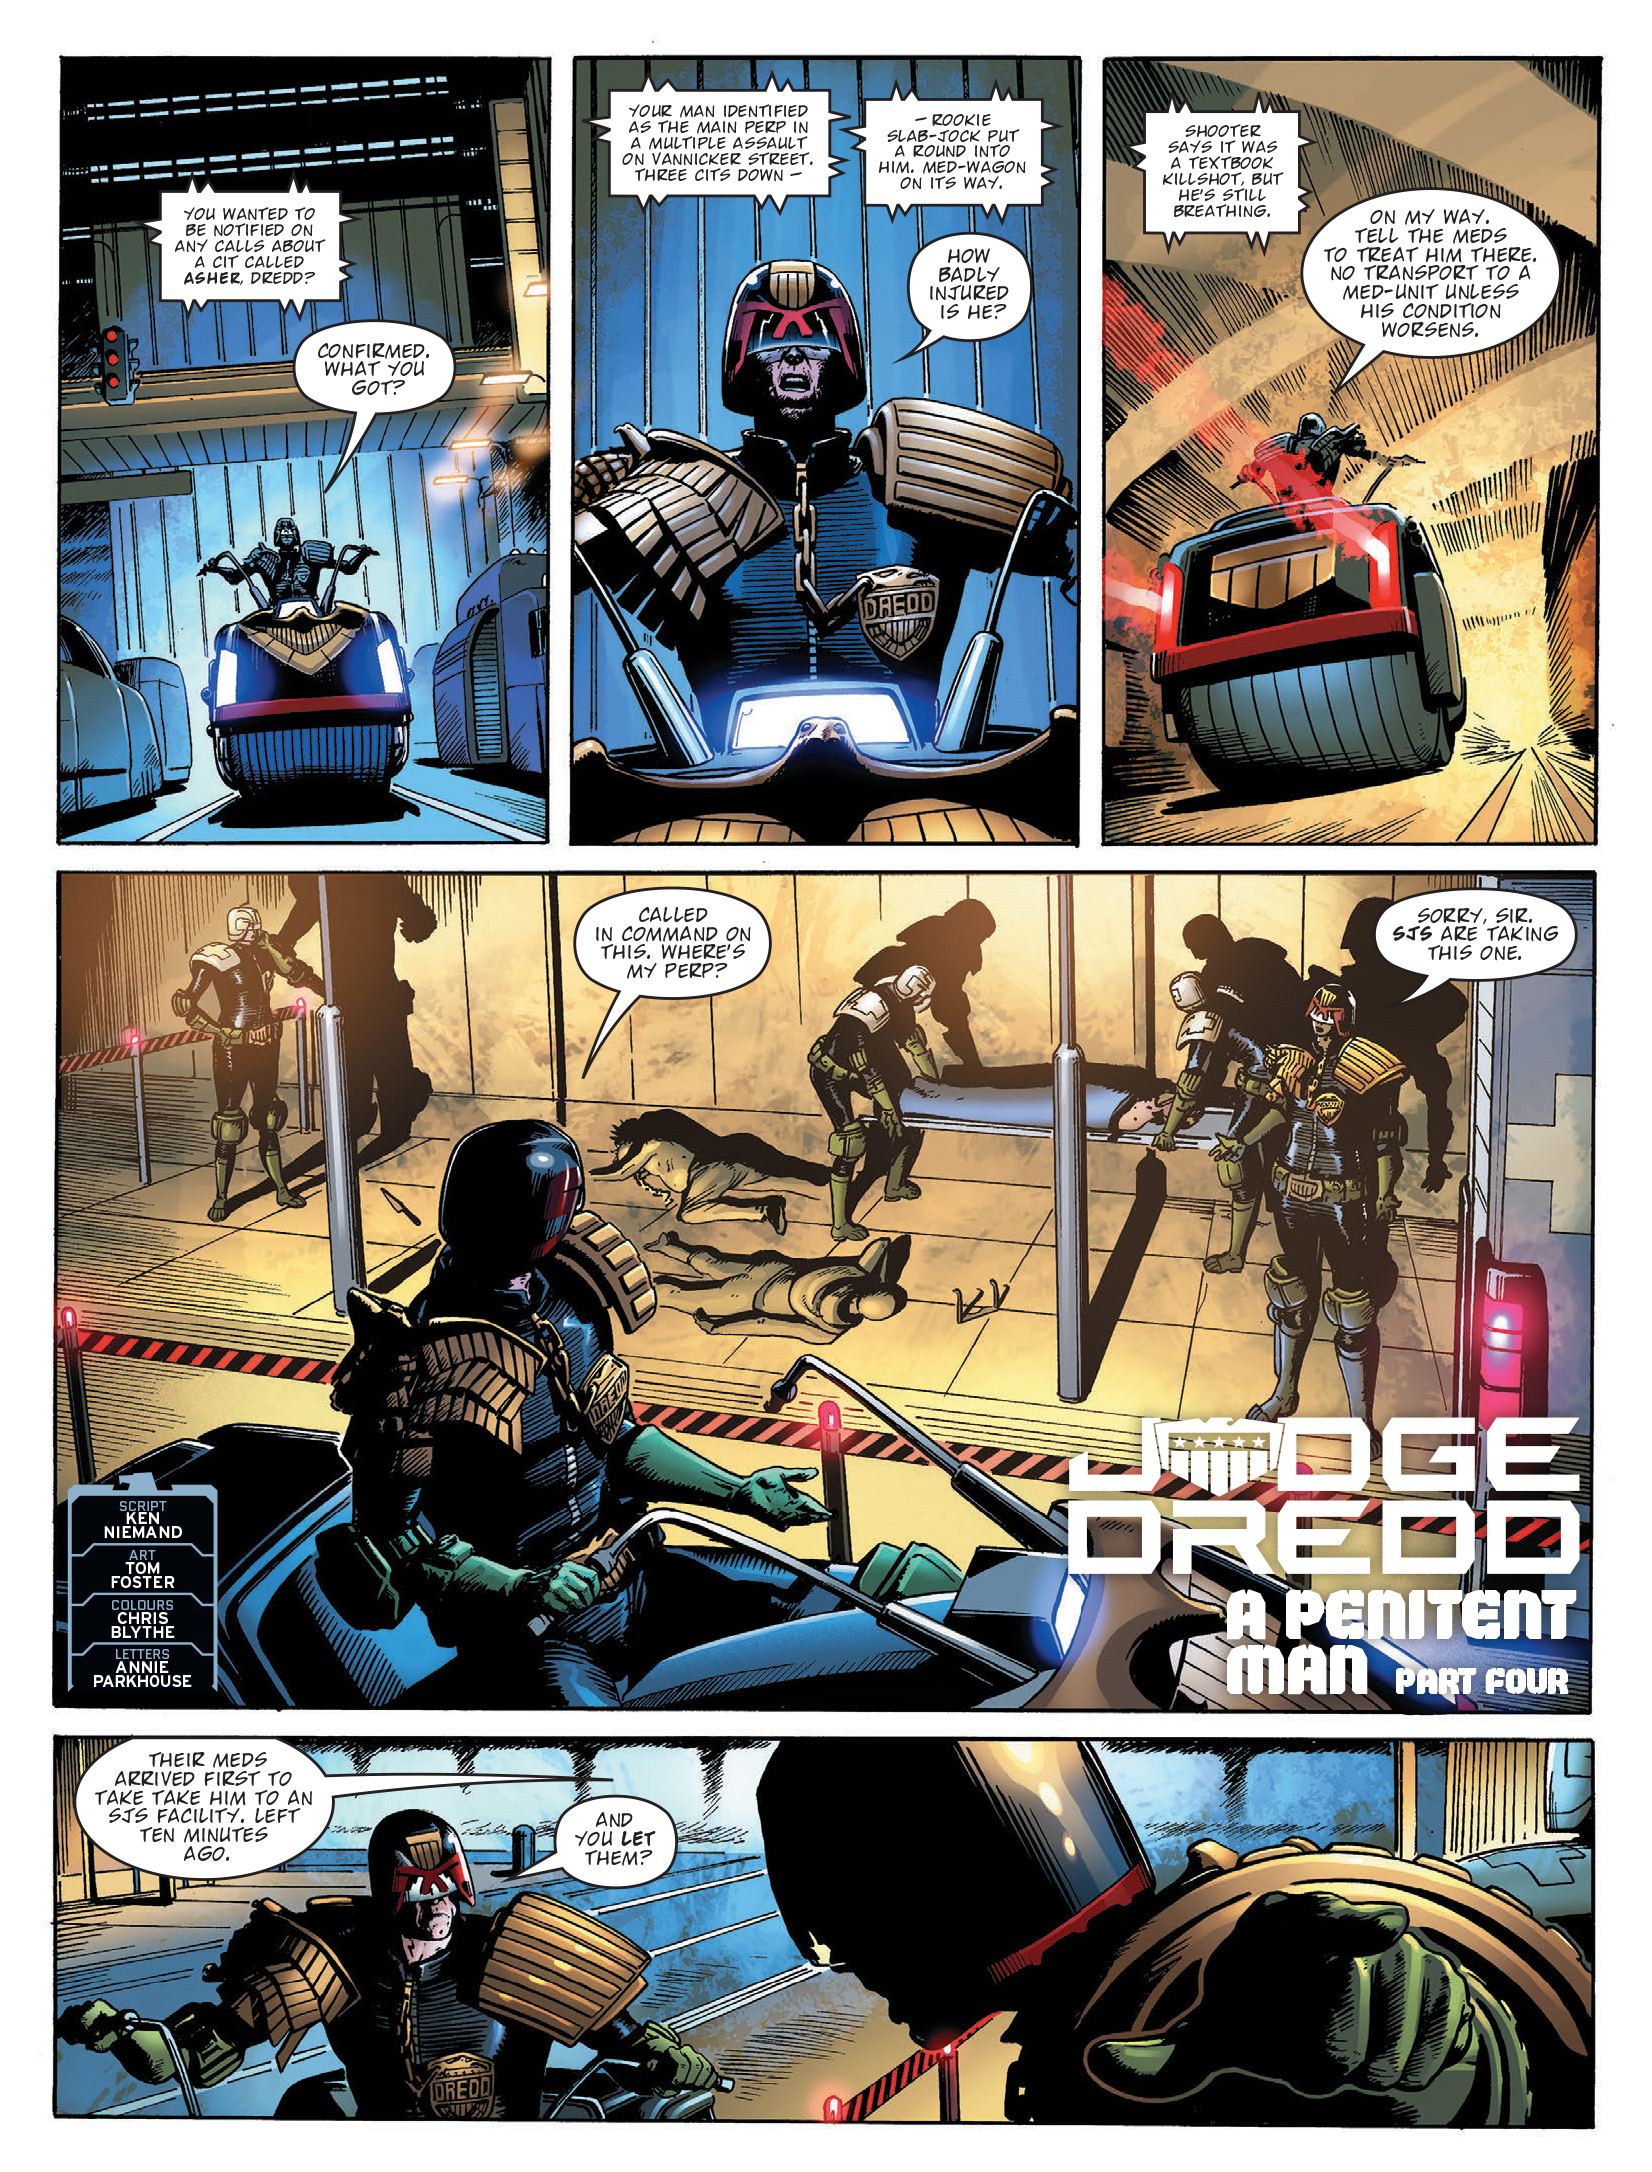 2000 AD: Chapter 2228 - Page 3